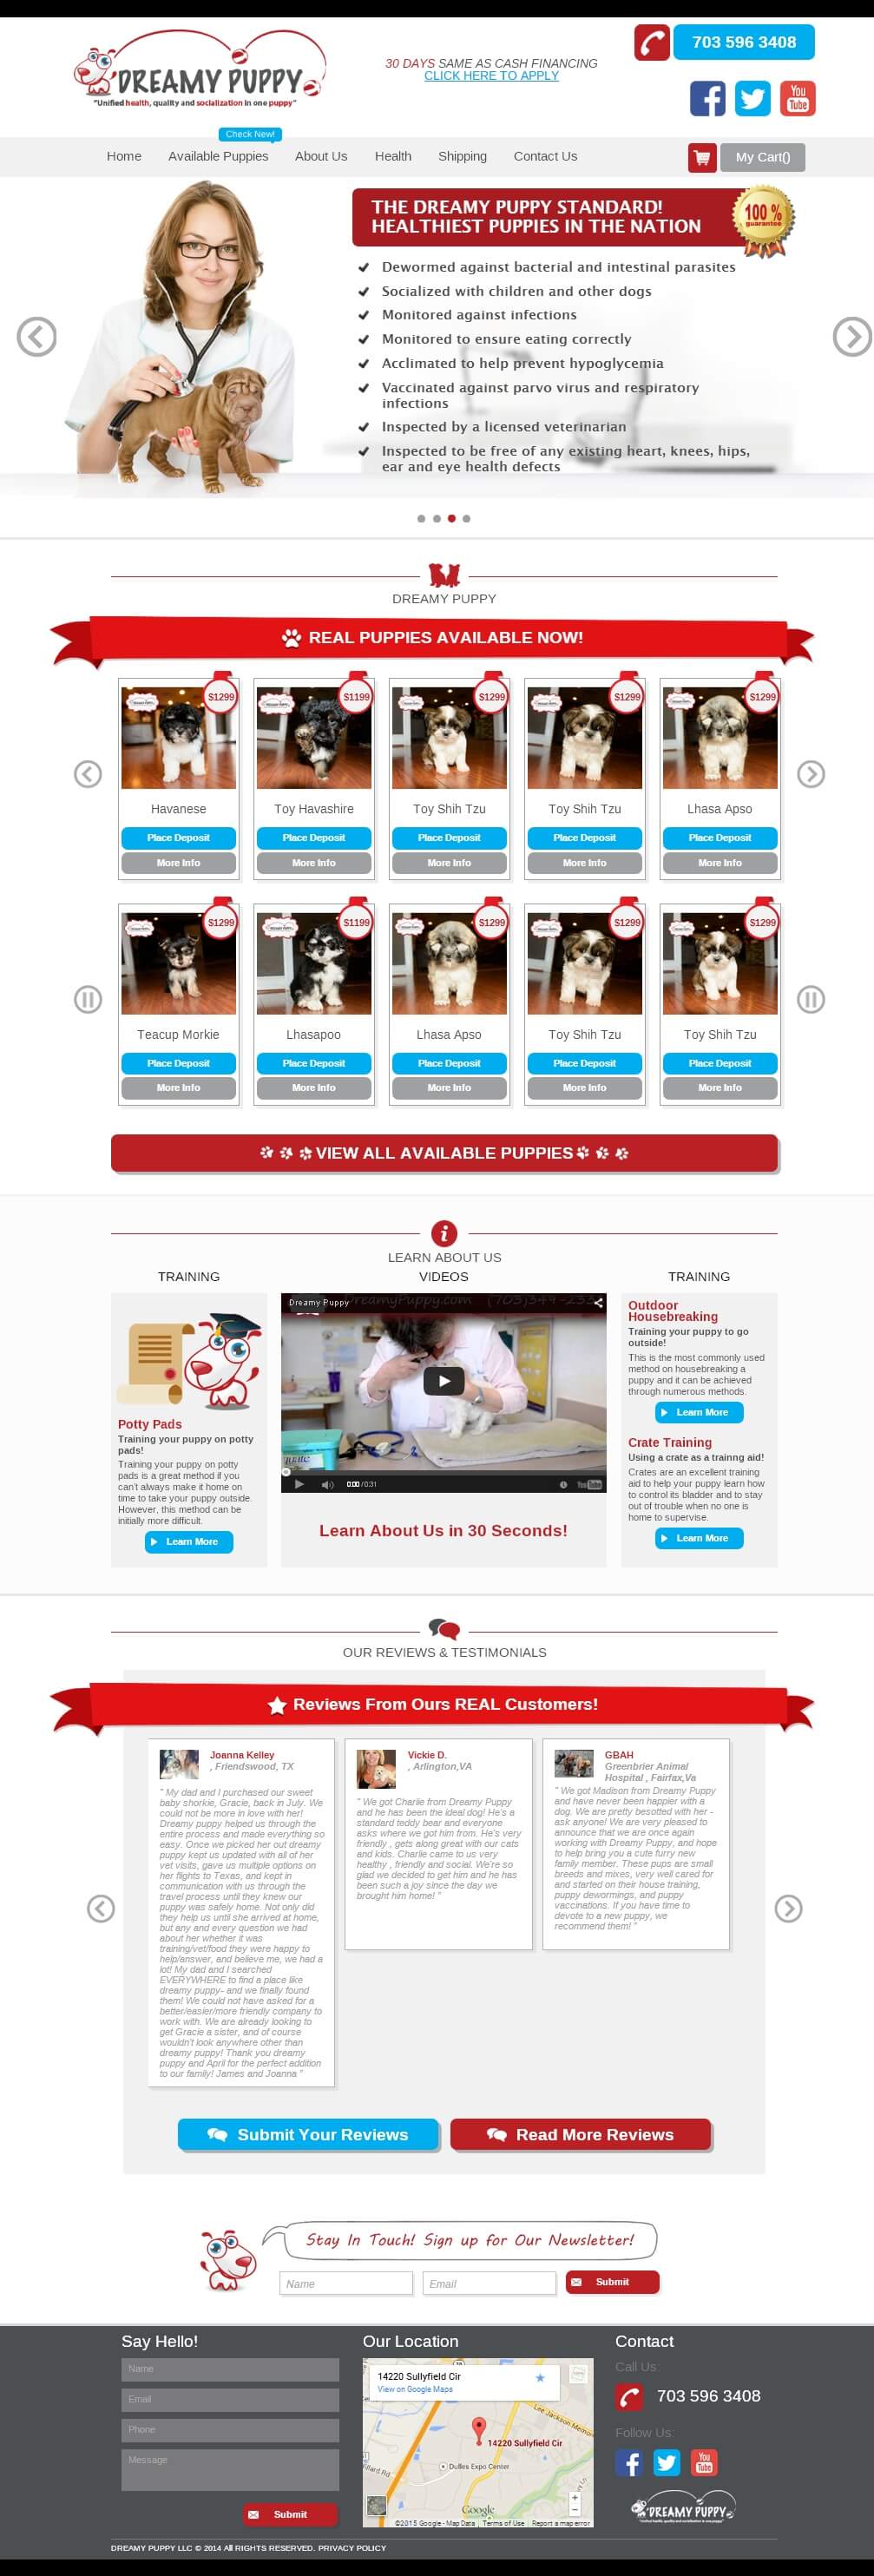  Dreamypuppy - A Magento Based website for Selling  Puppies